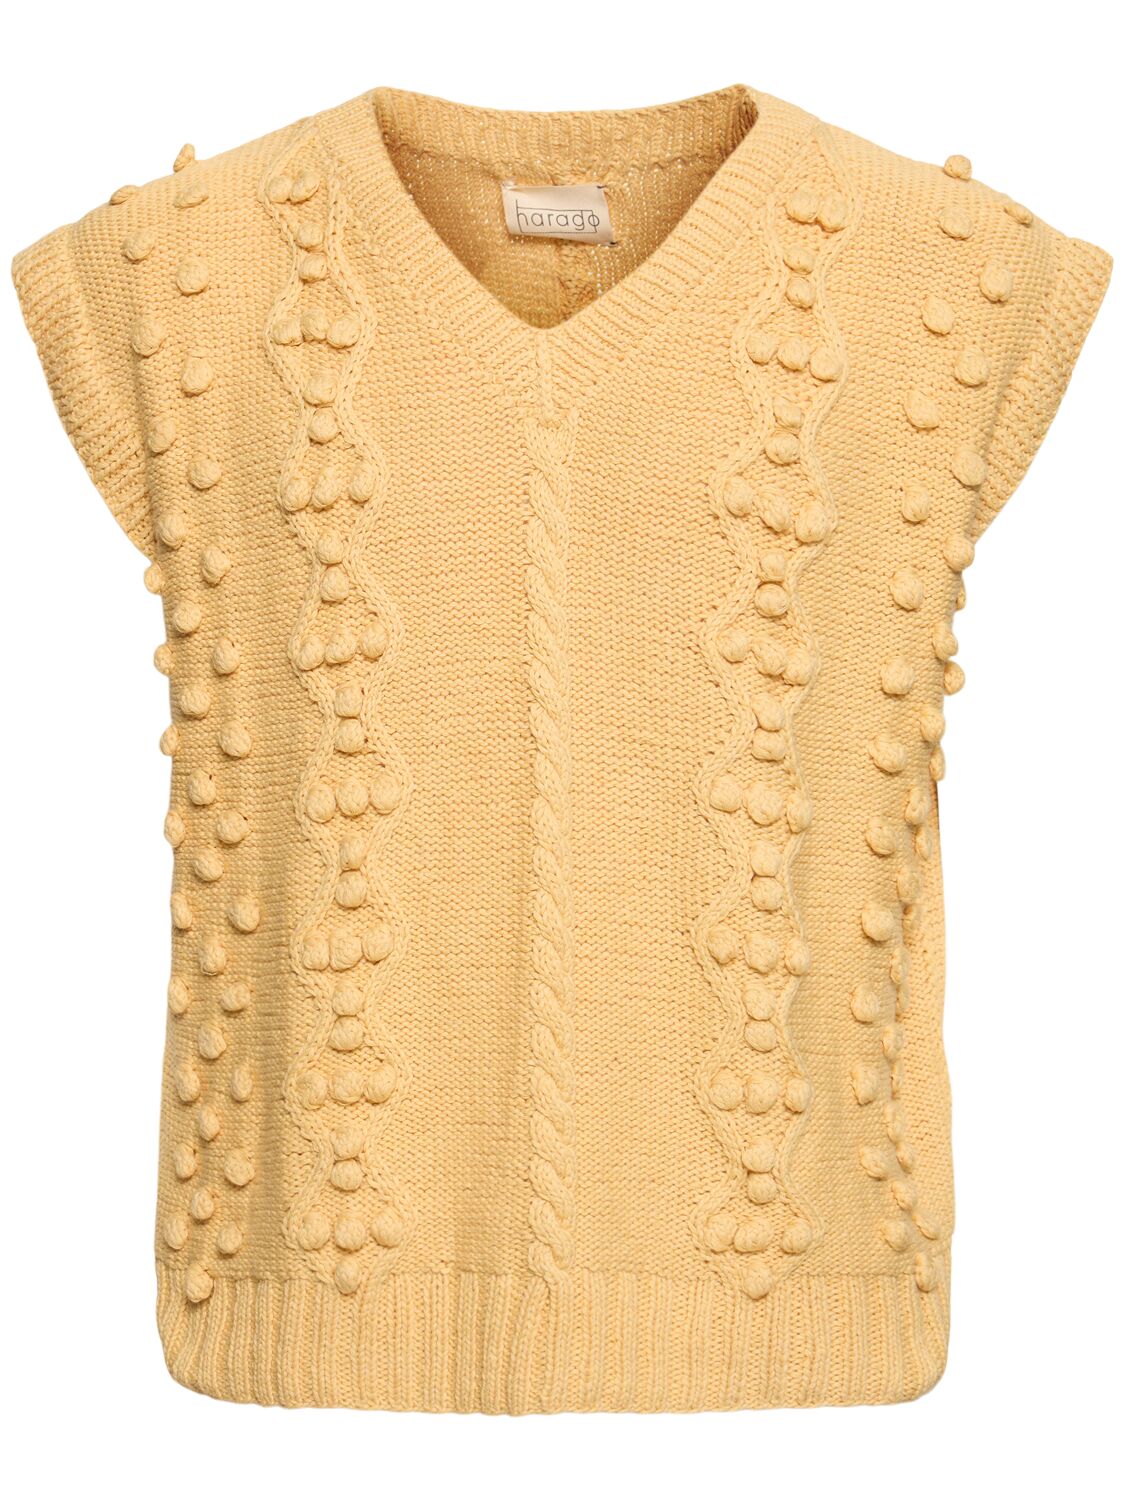 Harago Men's Craft Heritage Cable-knit Cotton Jumper Waistcoat In Beige